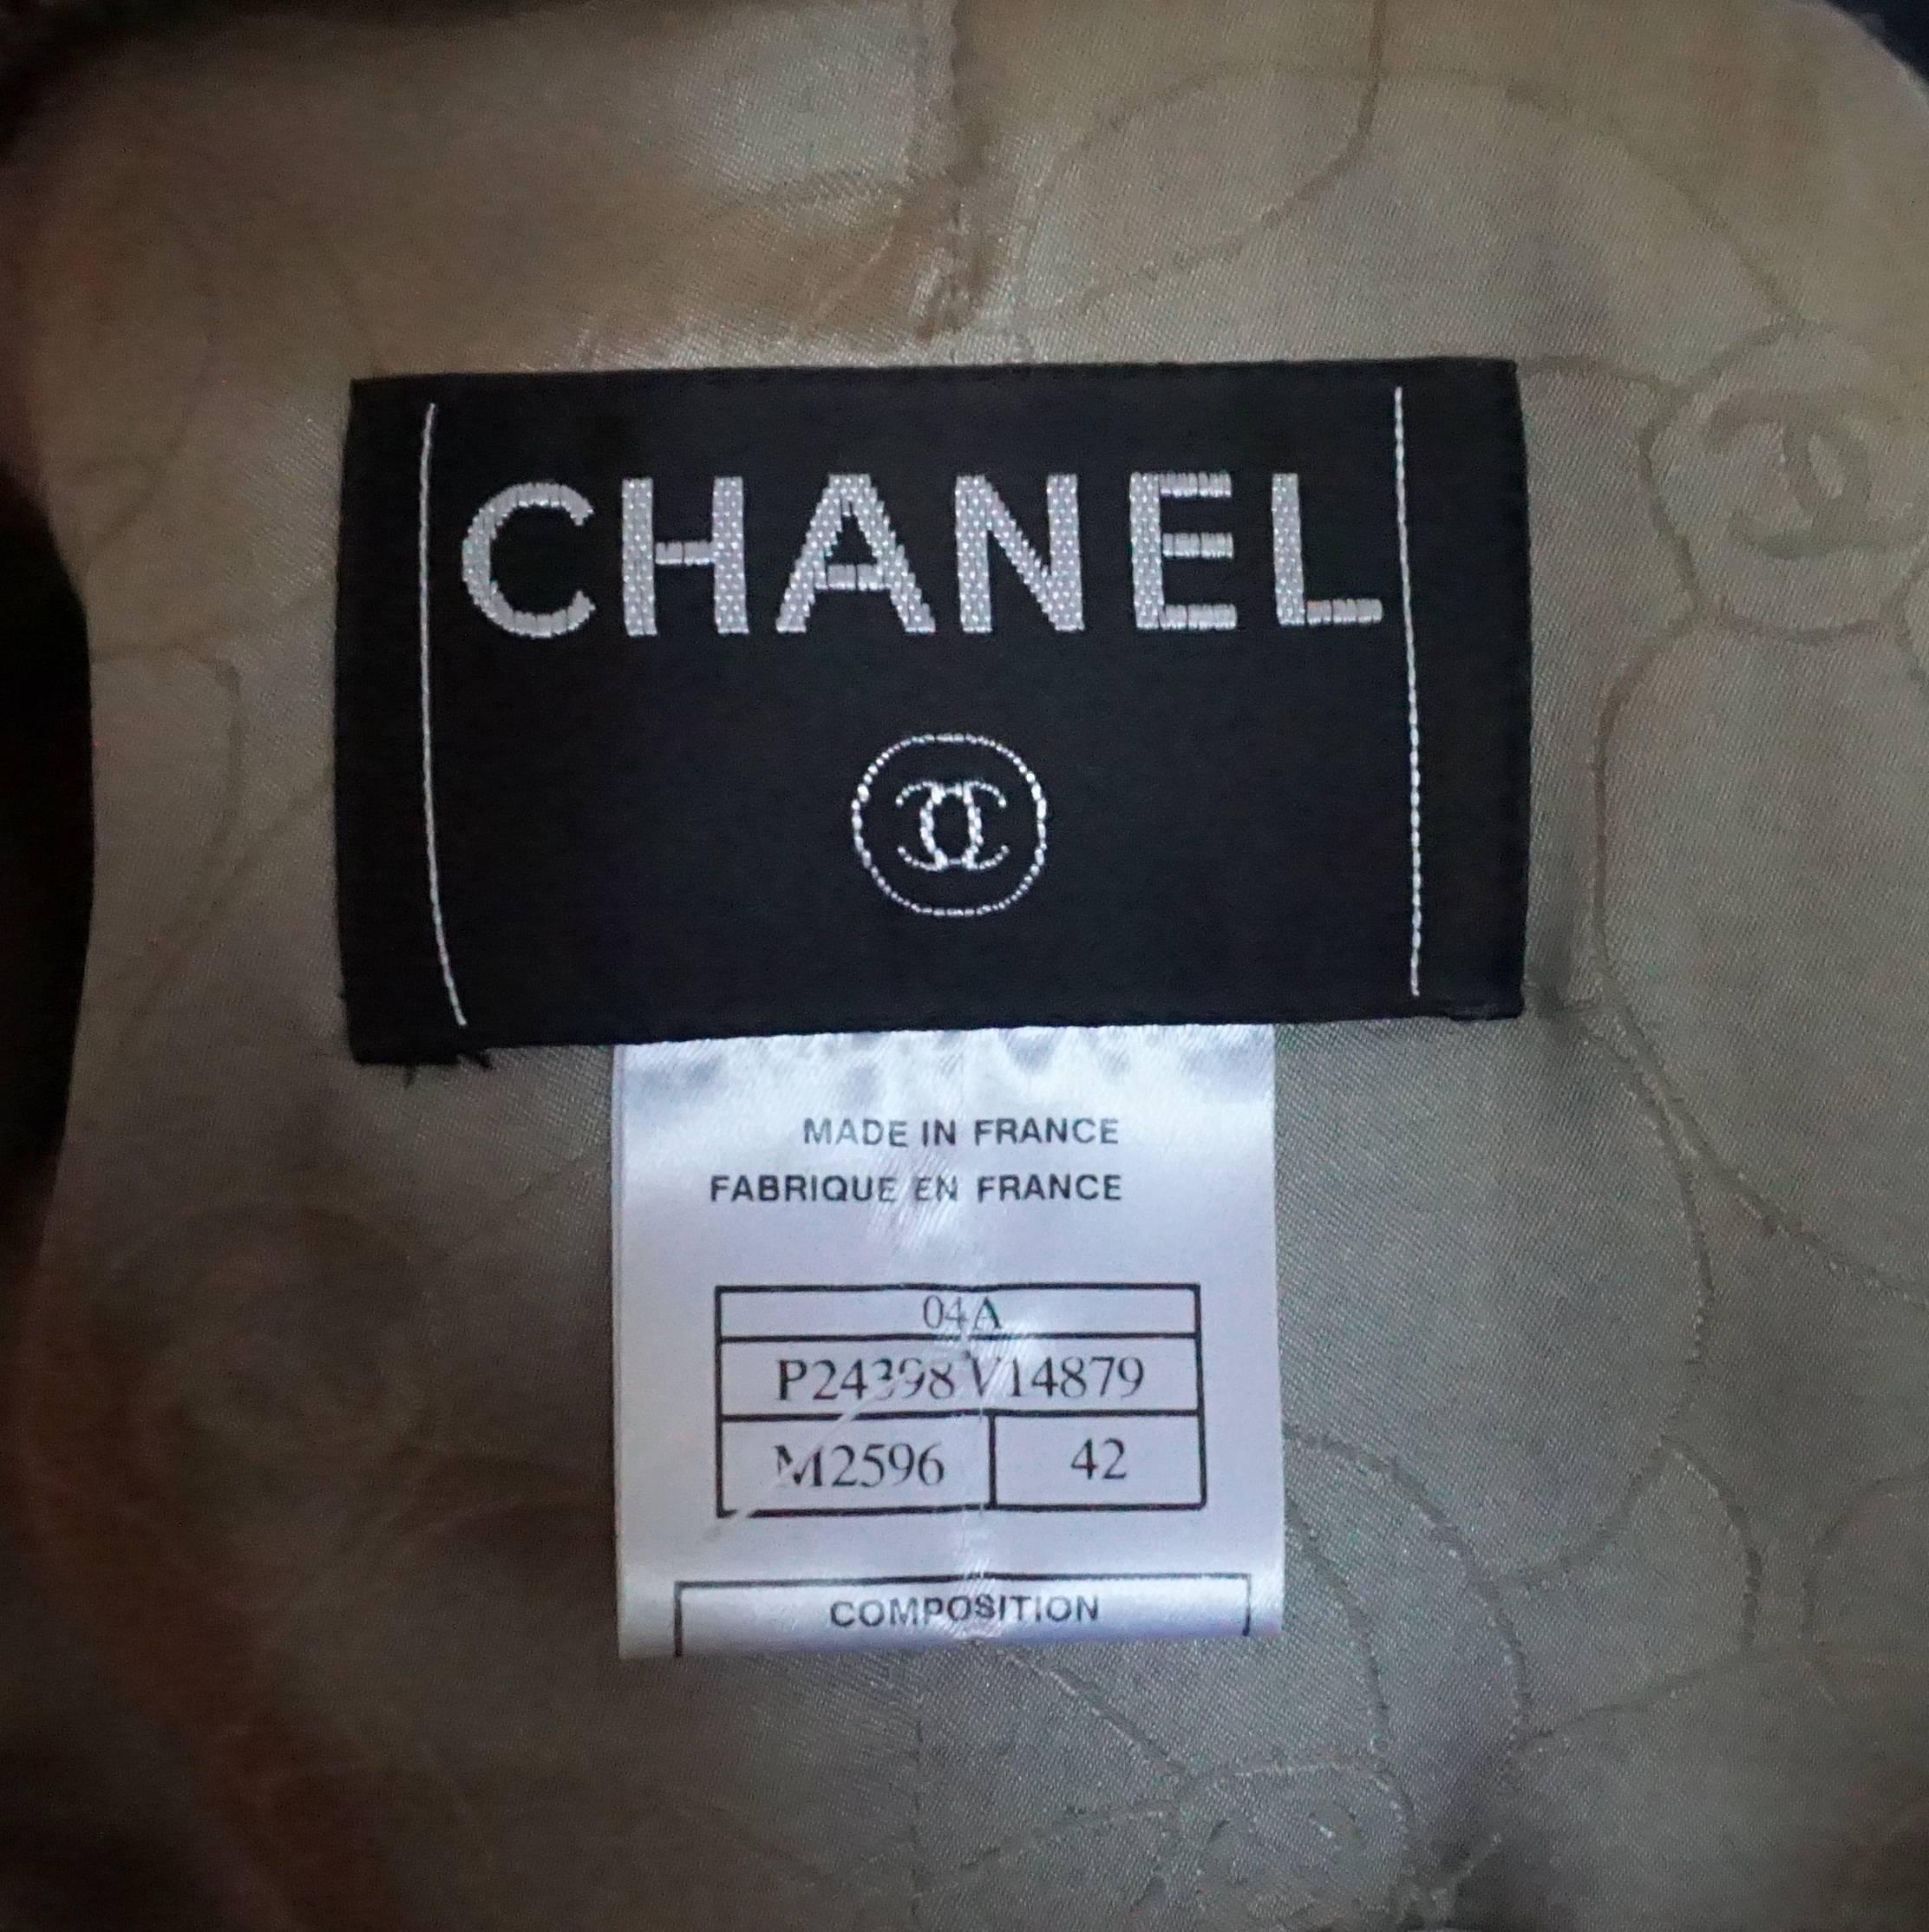 Chanel Metallic Multi-Color Tweed Jacket with Silver Buttons - 42 - 04A 1